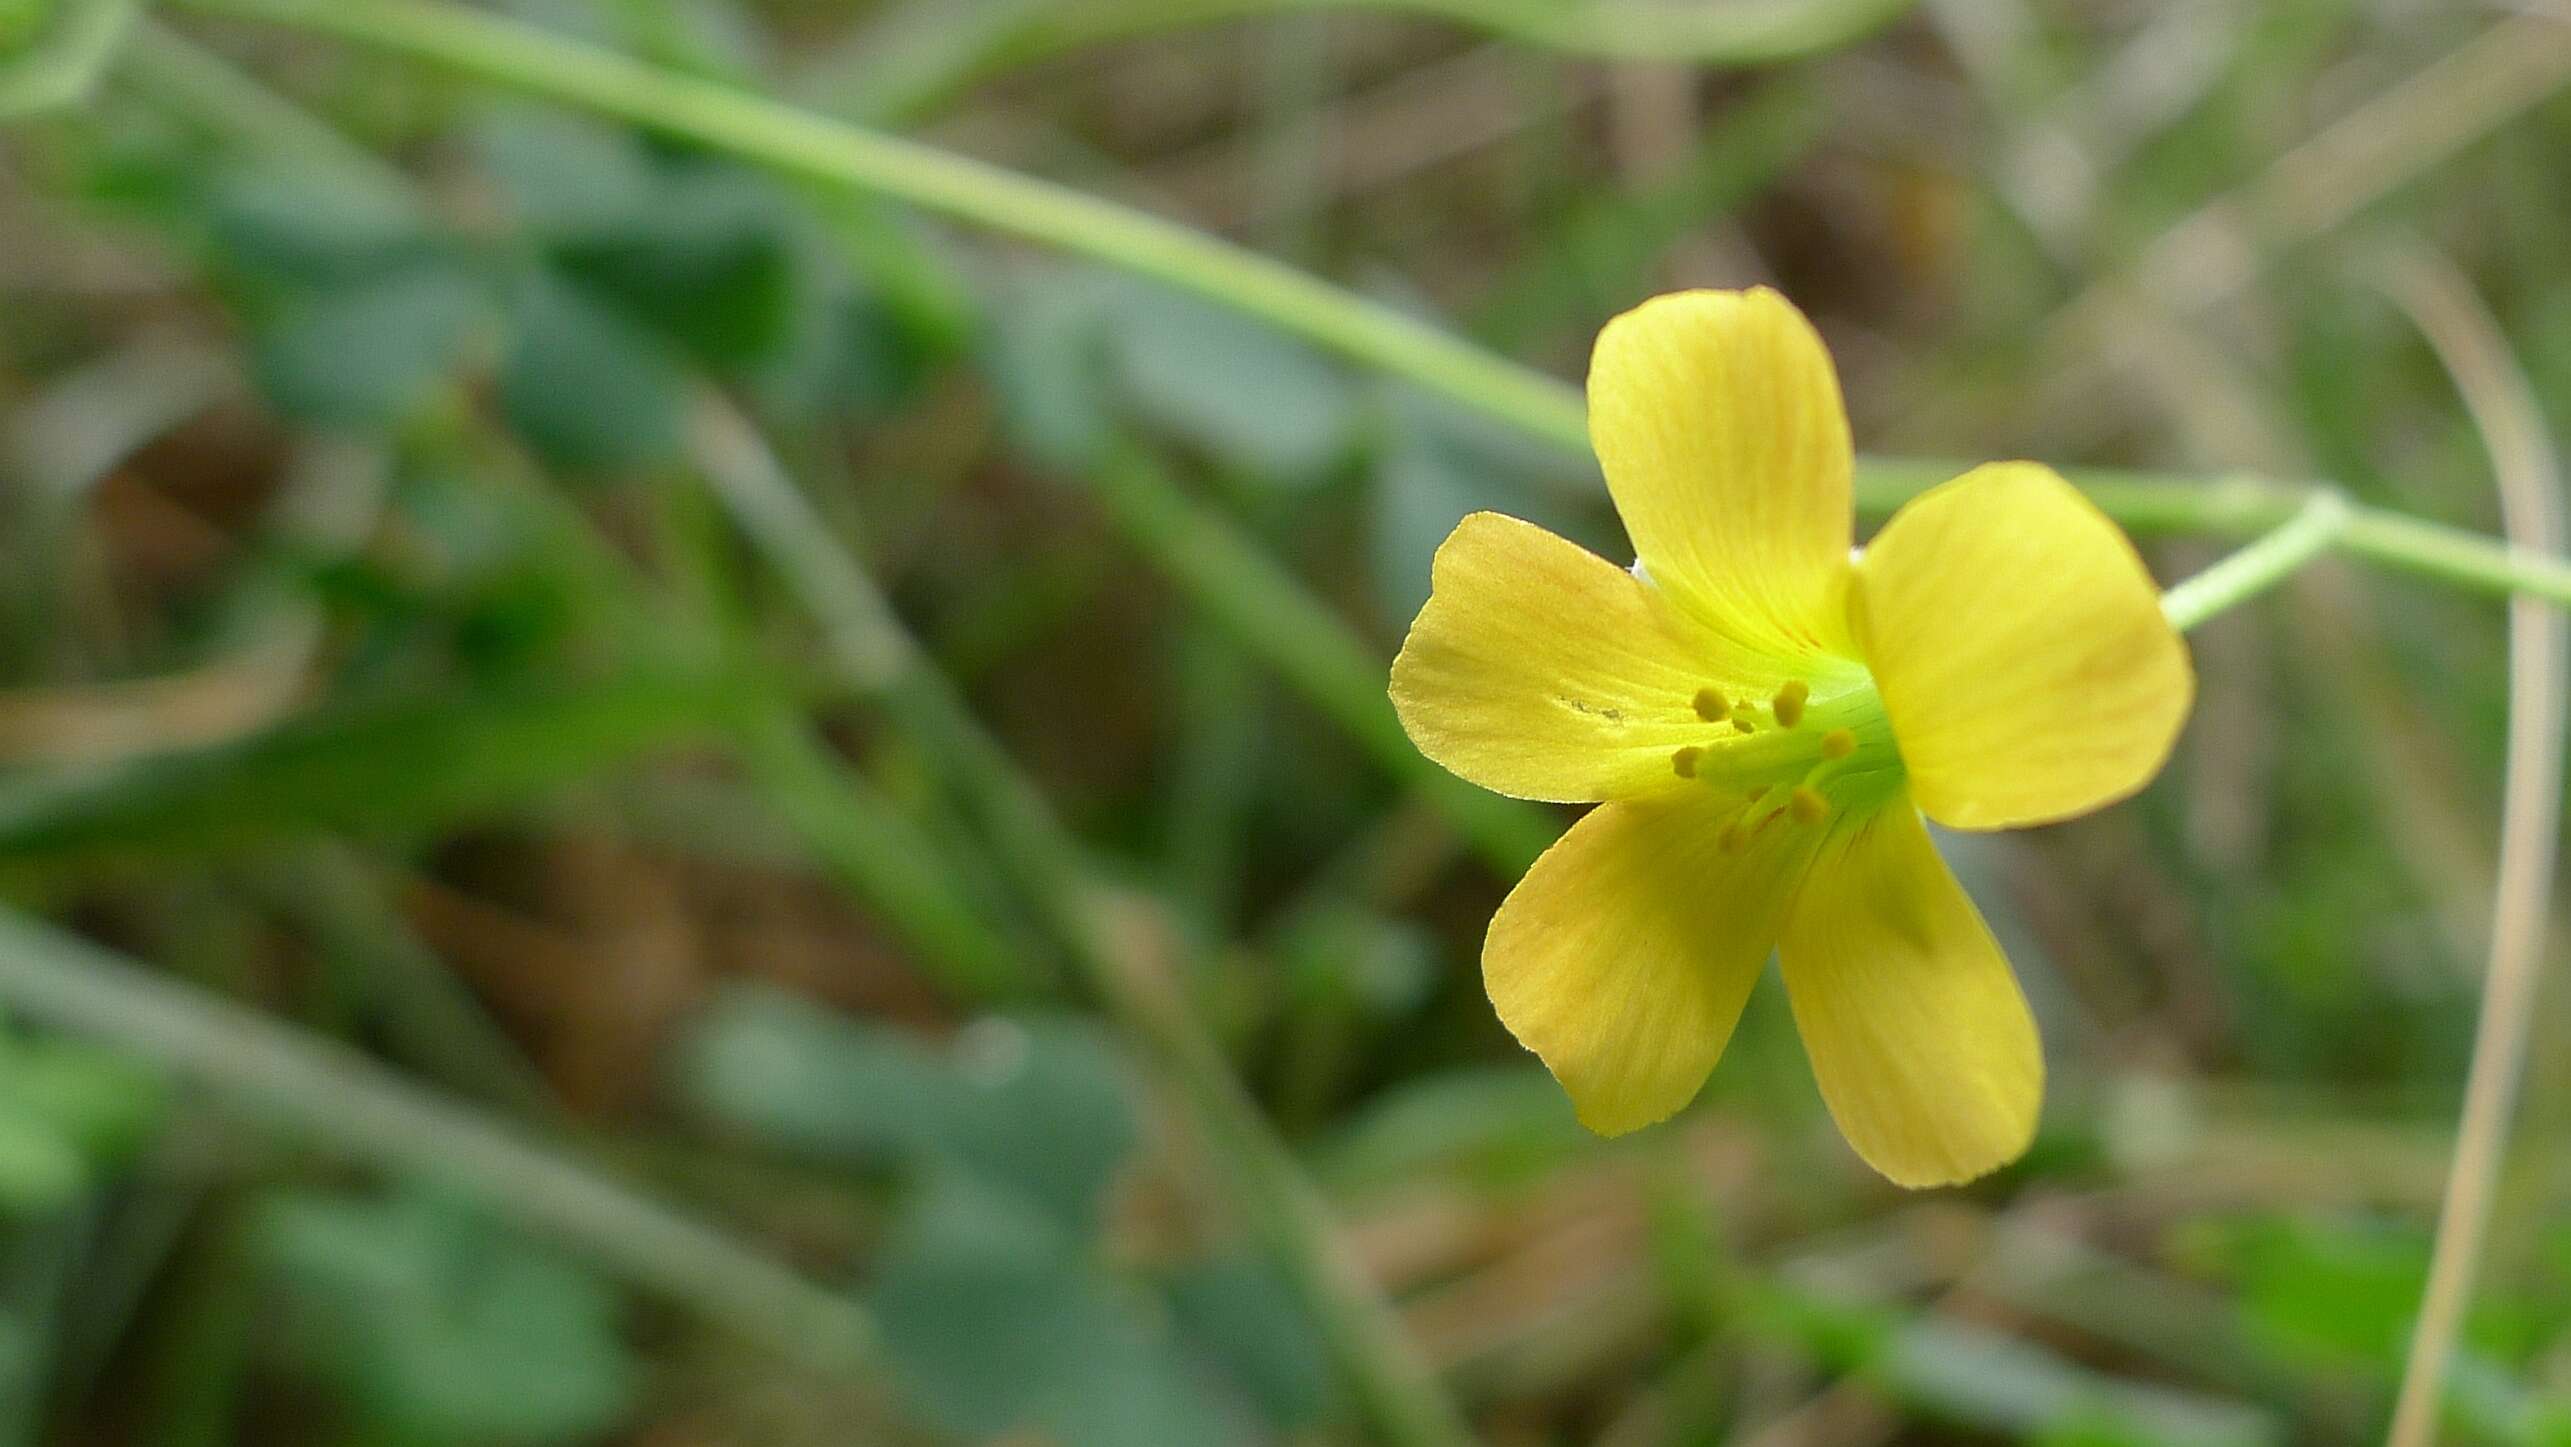 Image of Oxalis perennans Haw.